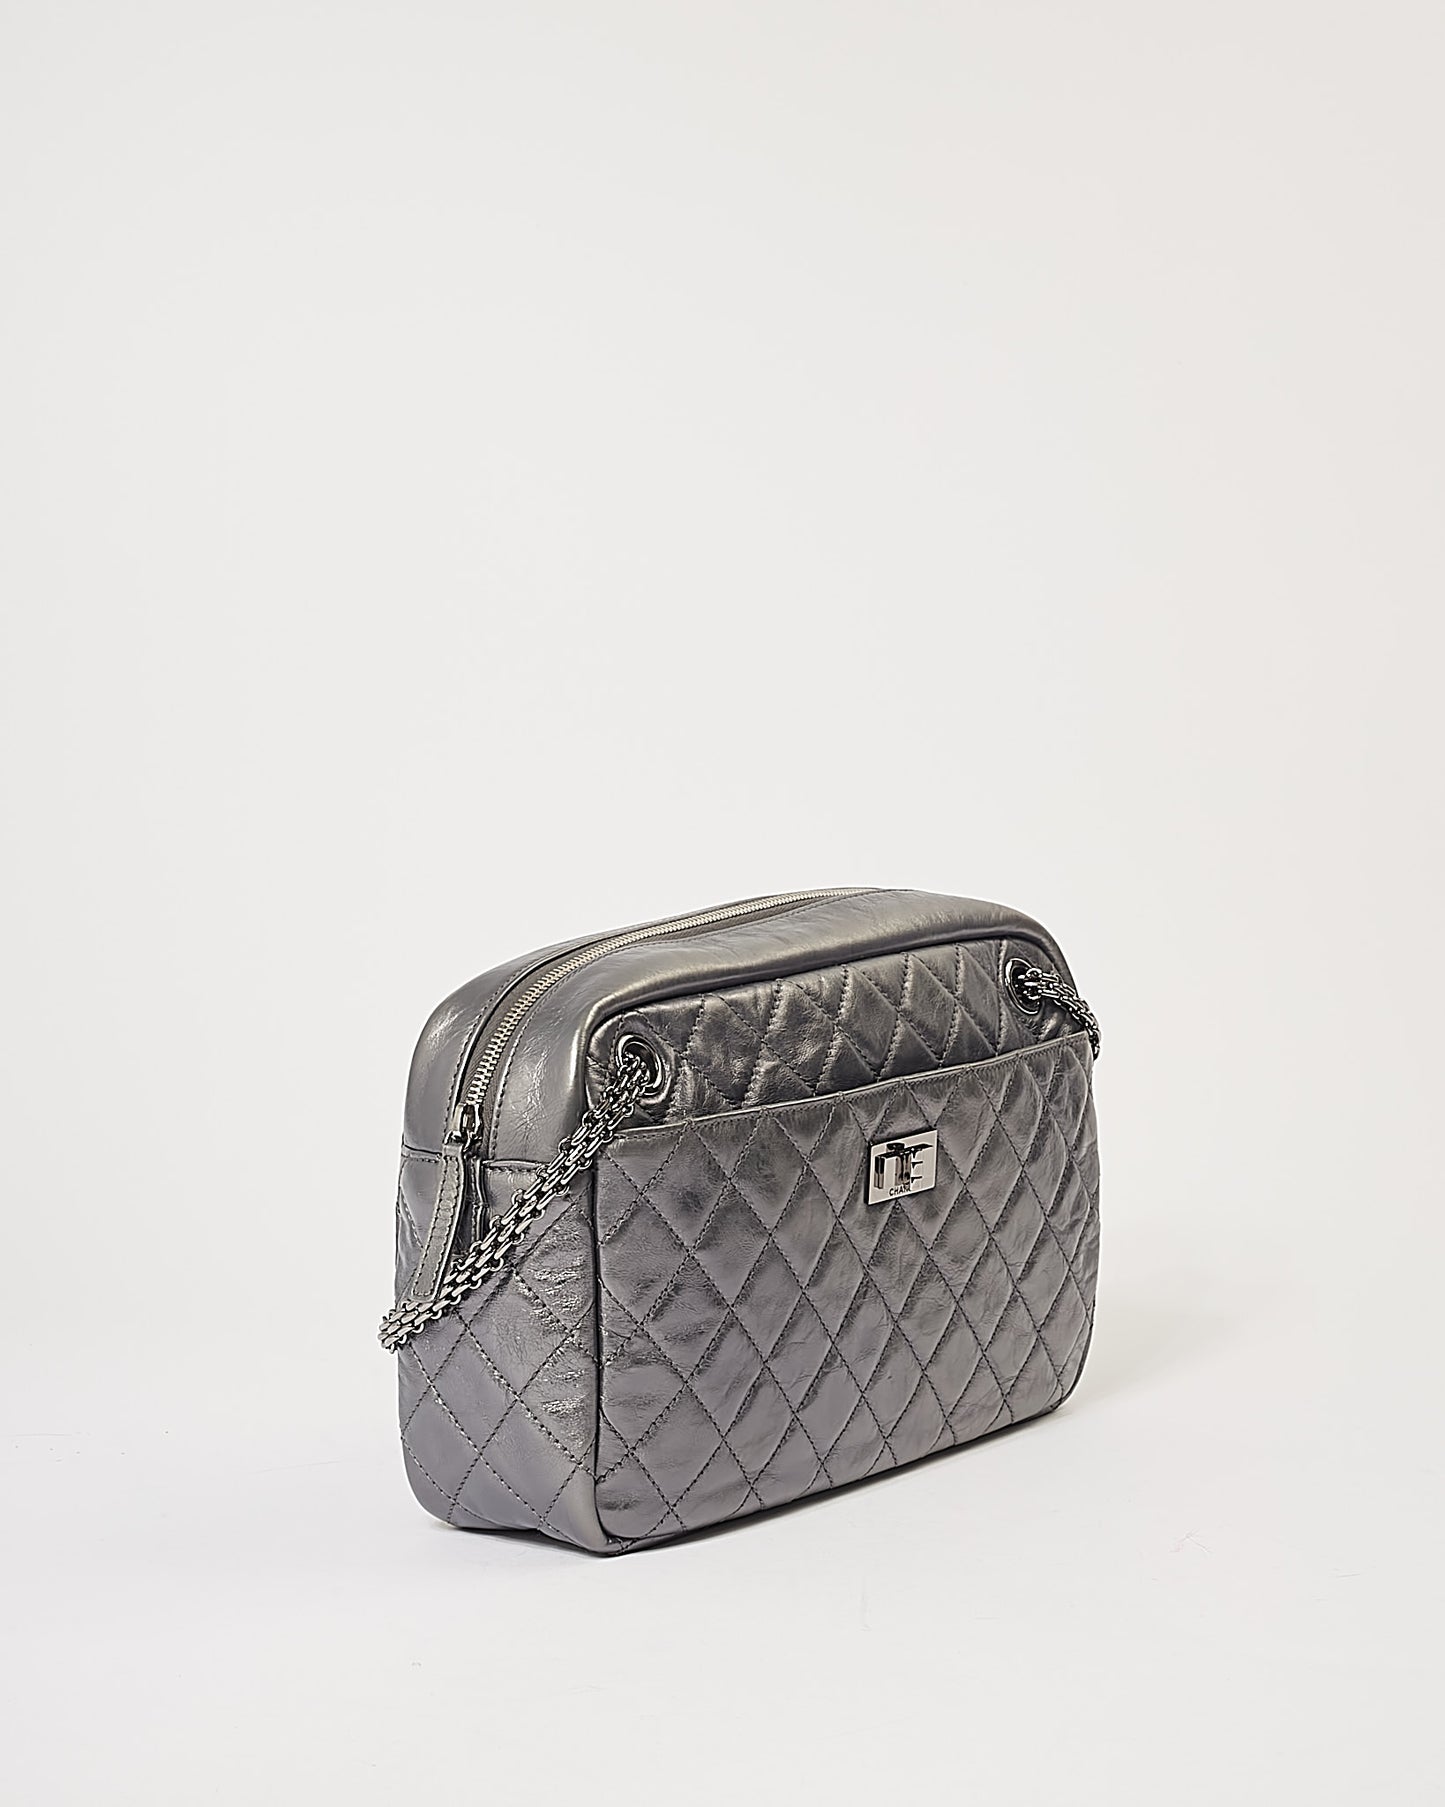 Chanel Dark Silver Leather Large Reissue Camera bag